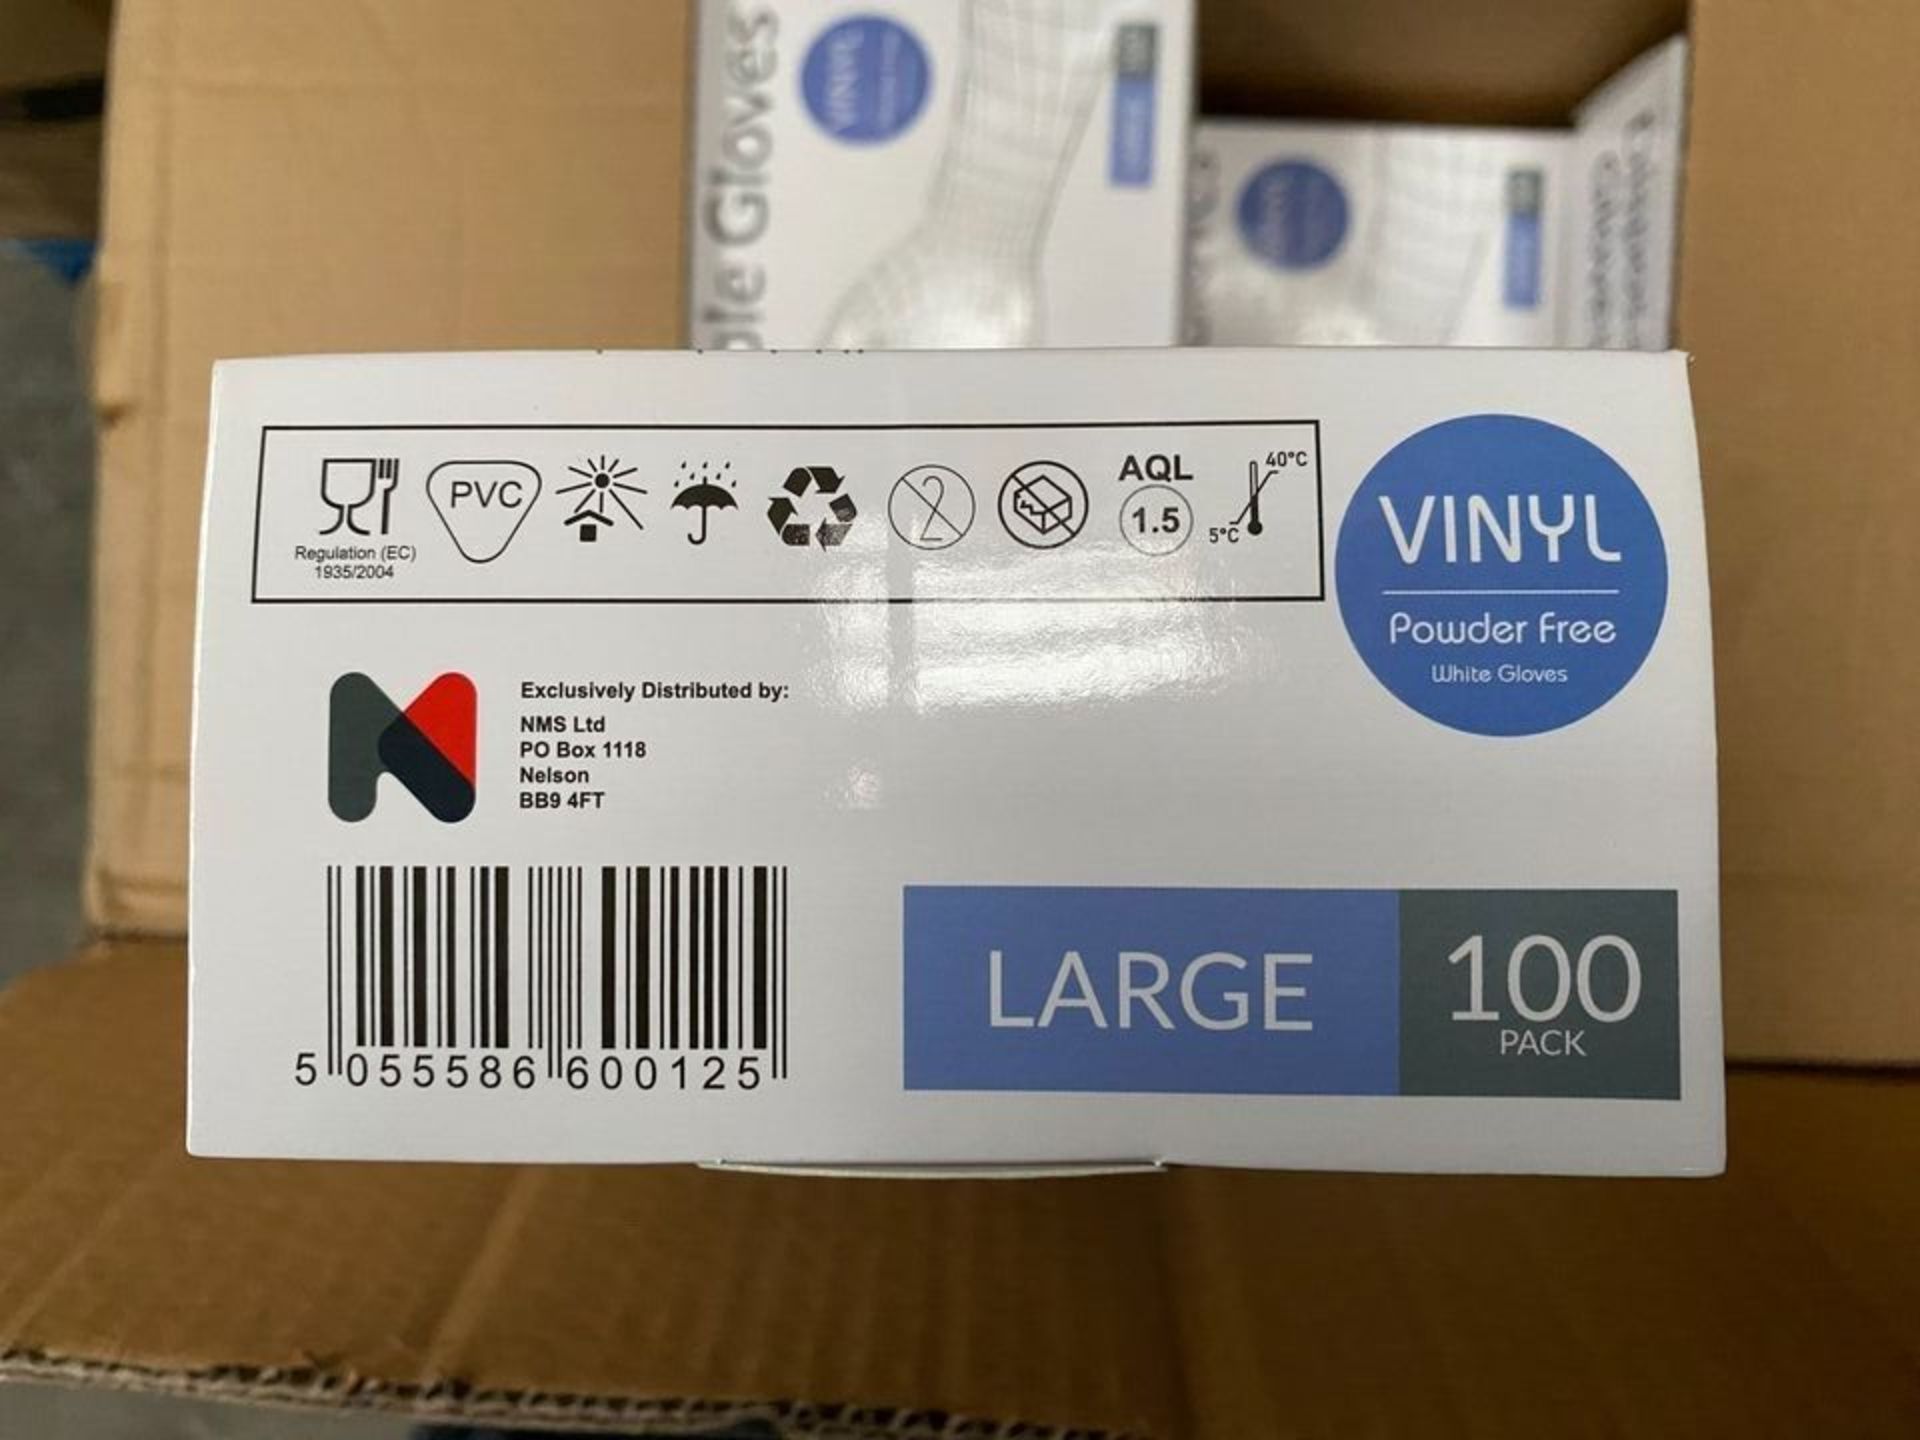 X40 BOXES OF 100 VINYL POWDER FREE LARGE DISPOSABLE WHITE GLOVES RRP £240 - Image 2 of 4